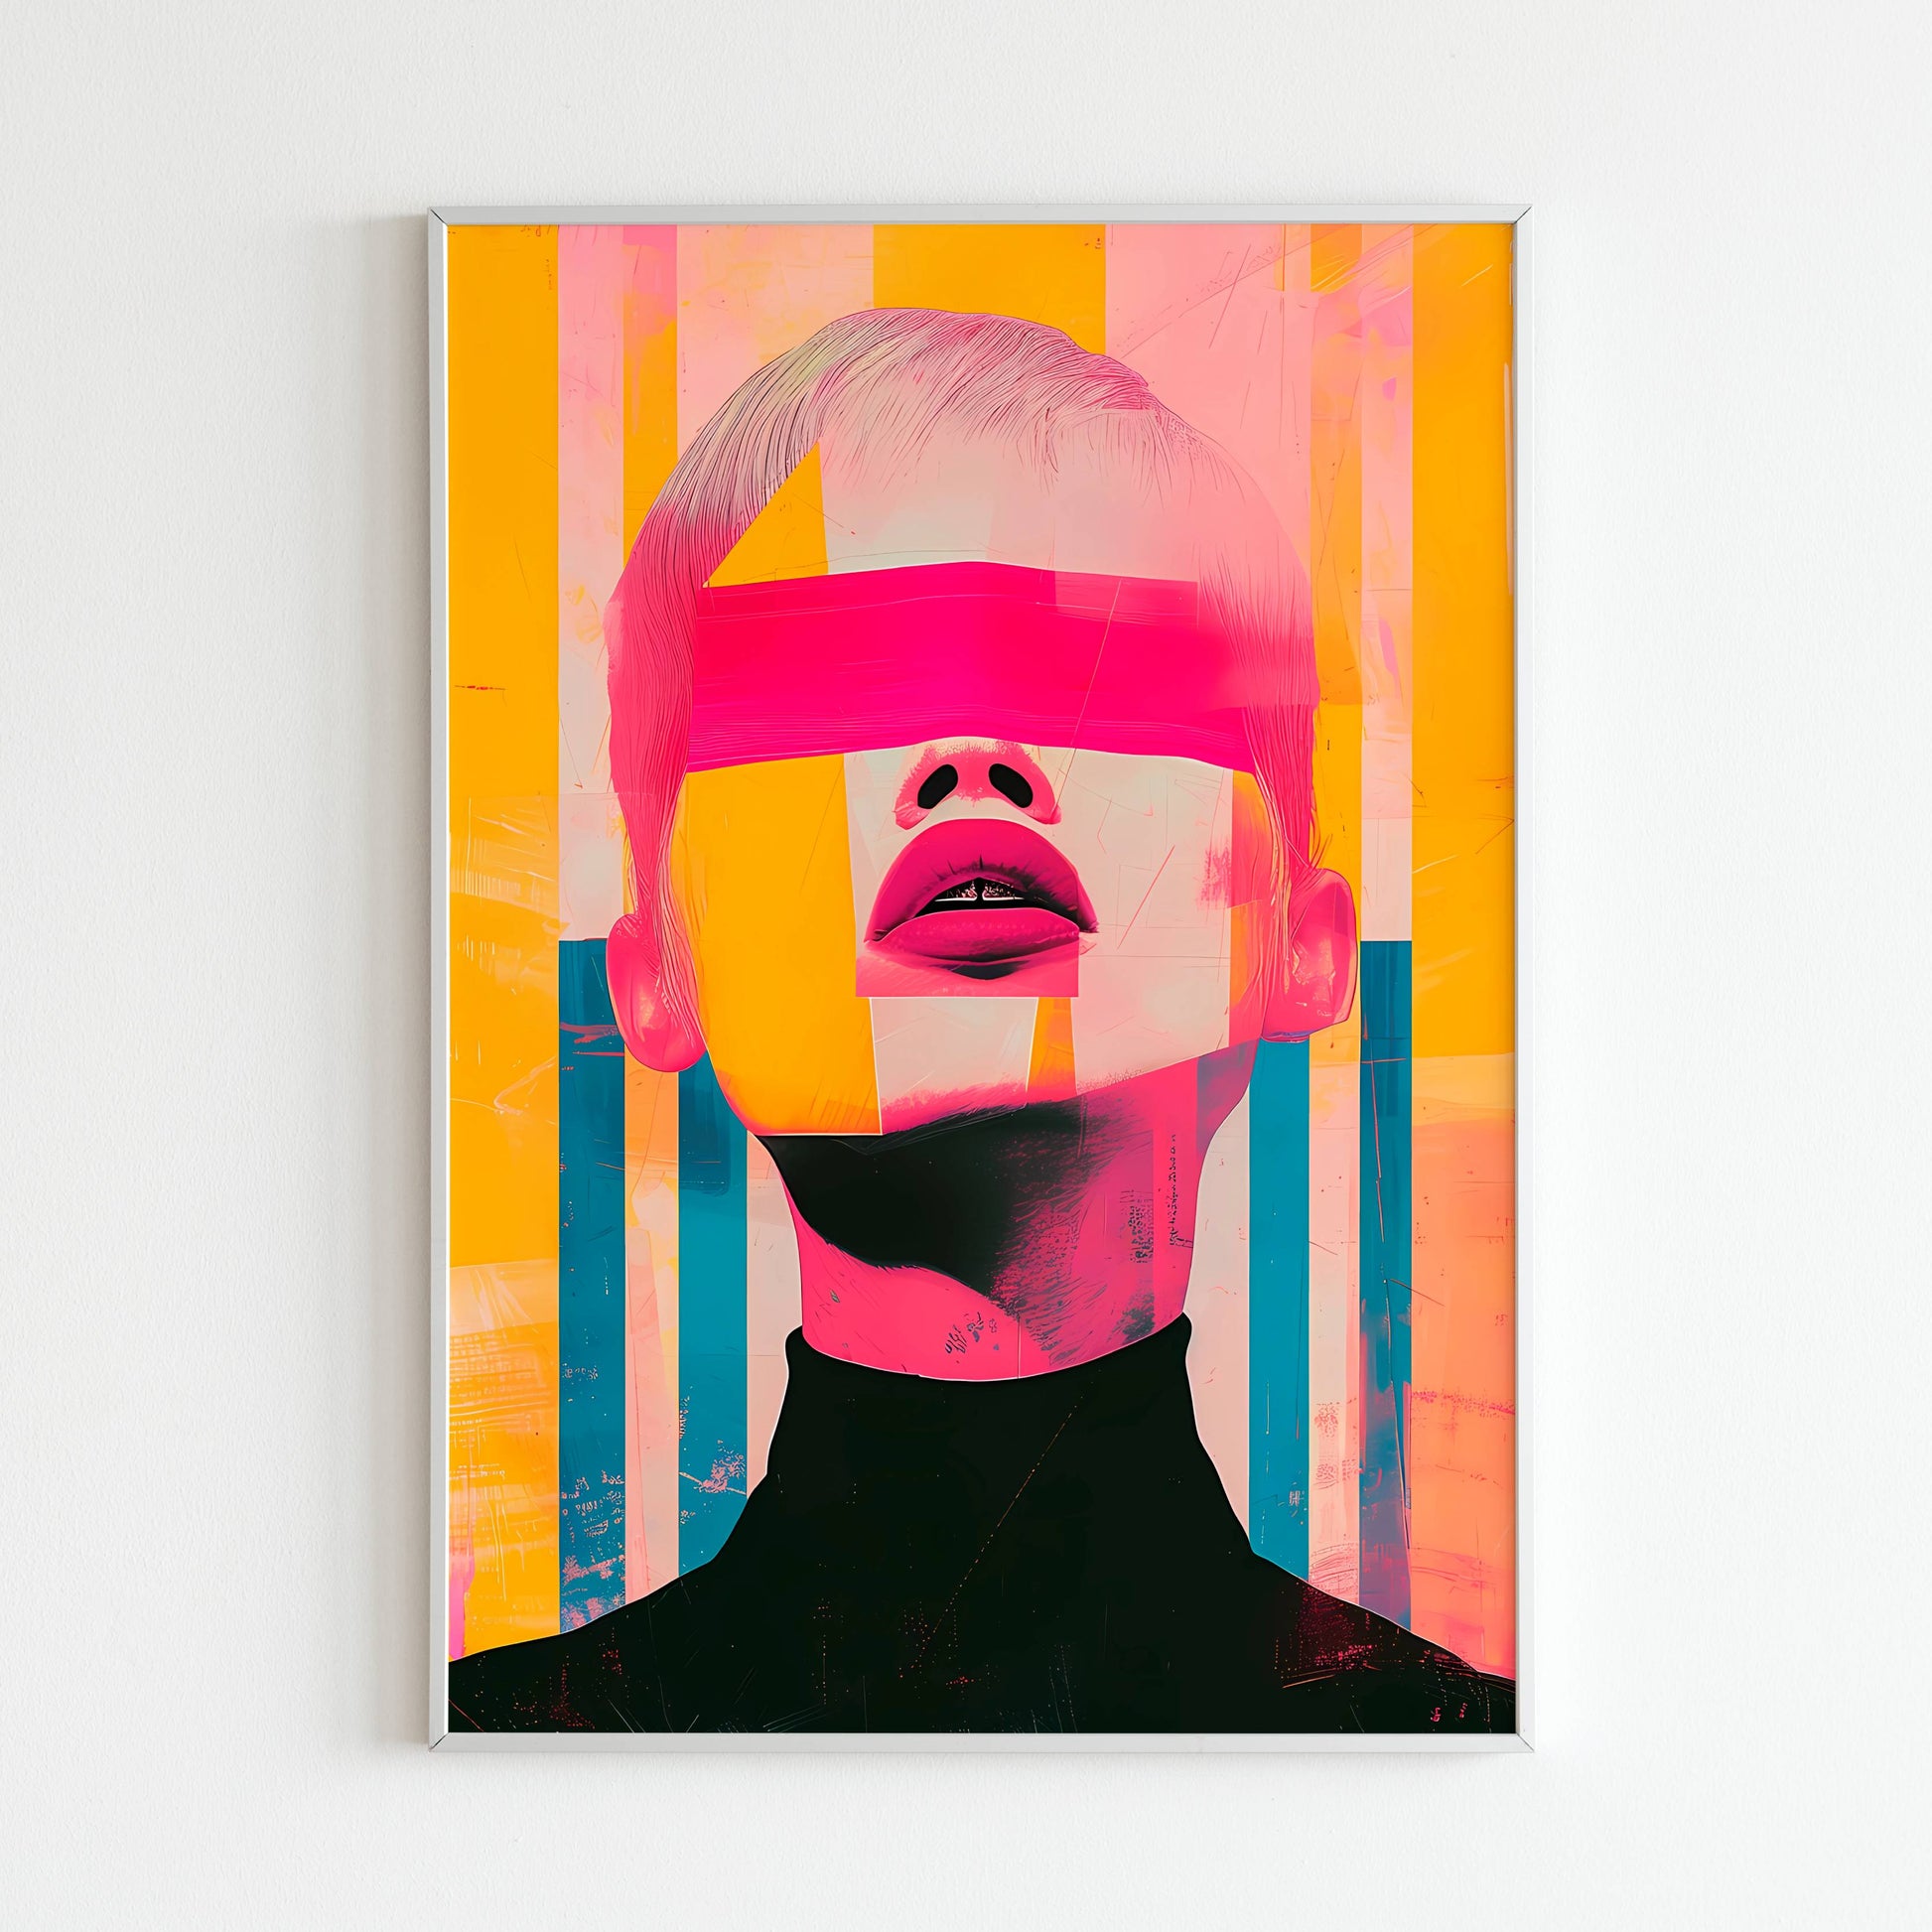 Blindfold Portrait - Printed Wall Art / Poster. This intriguing portrait poster sparks conversation and adds a touch of mystery to your space. Arrives ready to hang.